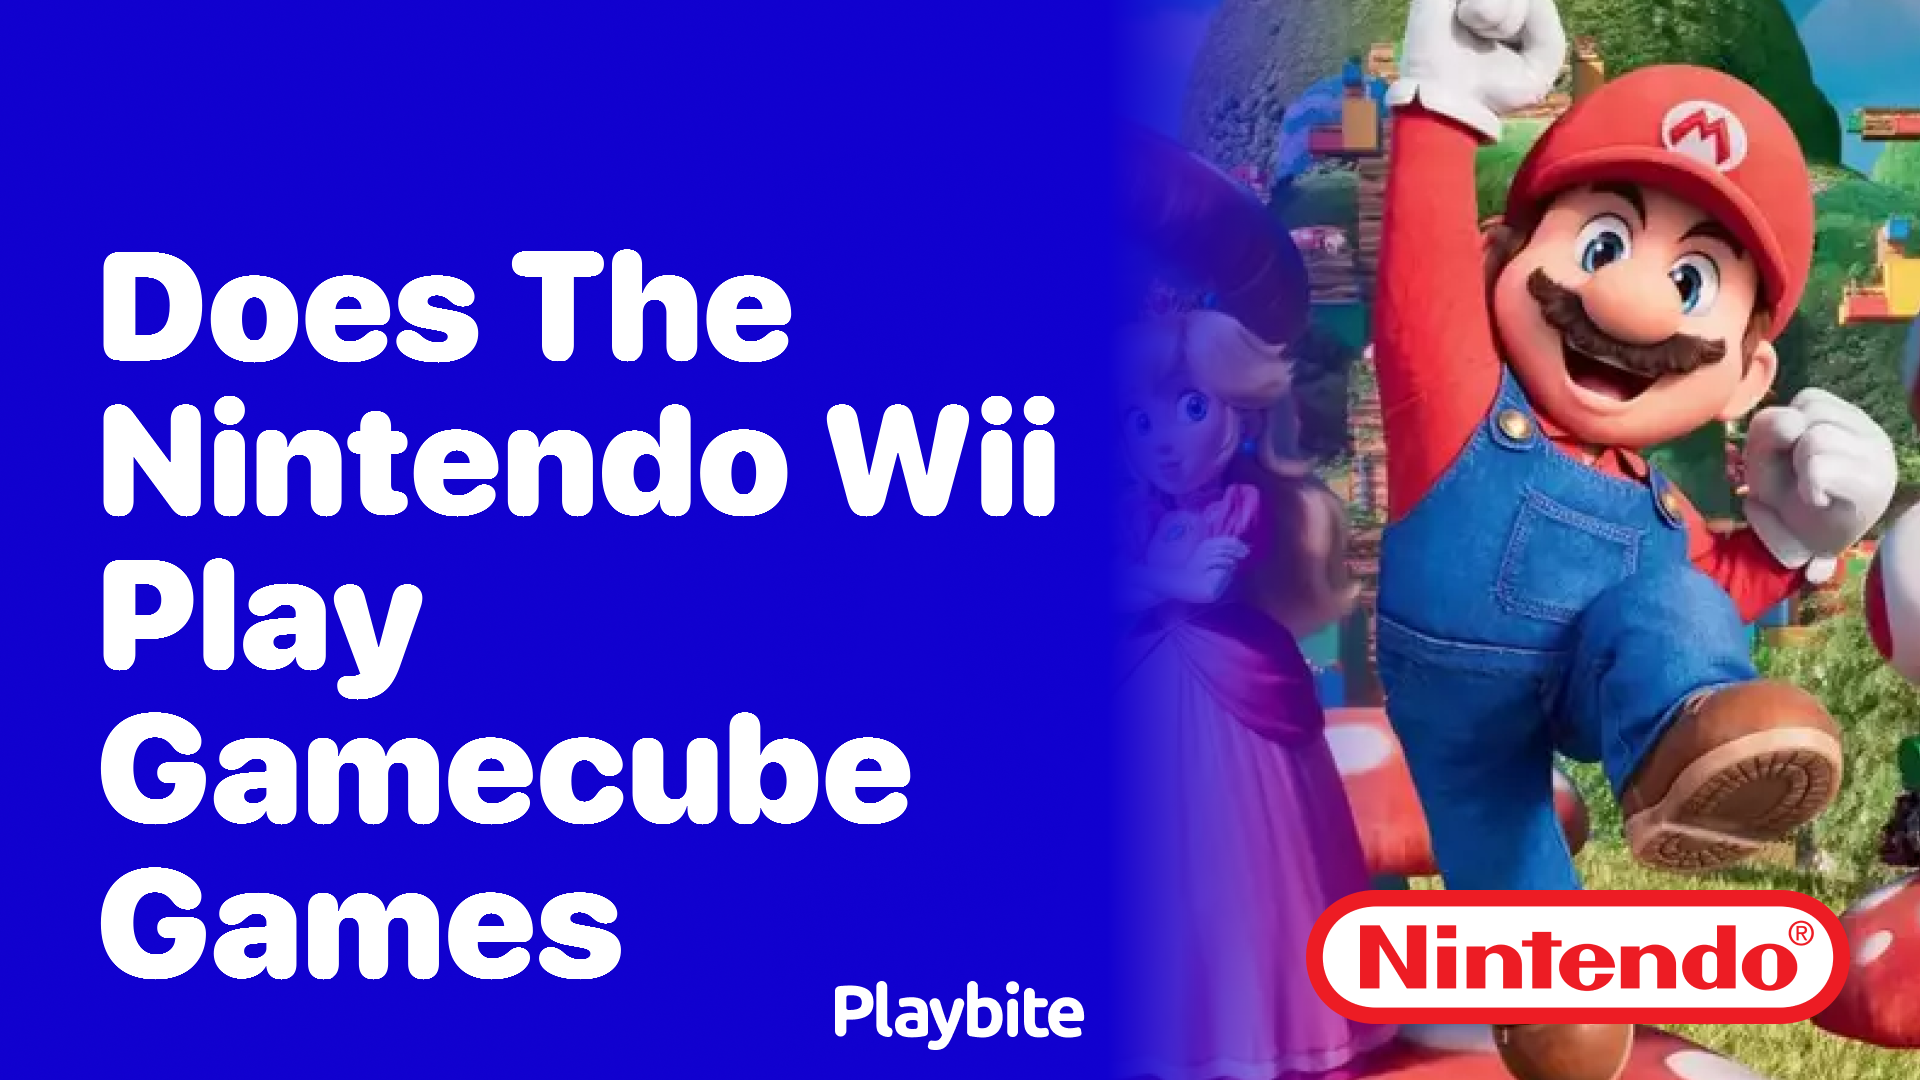 Does the Nintendo Wii Play GameCube Games?